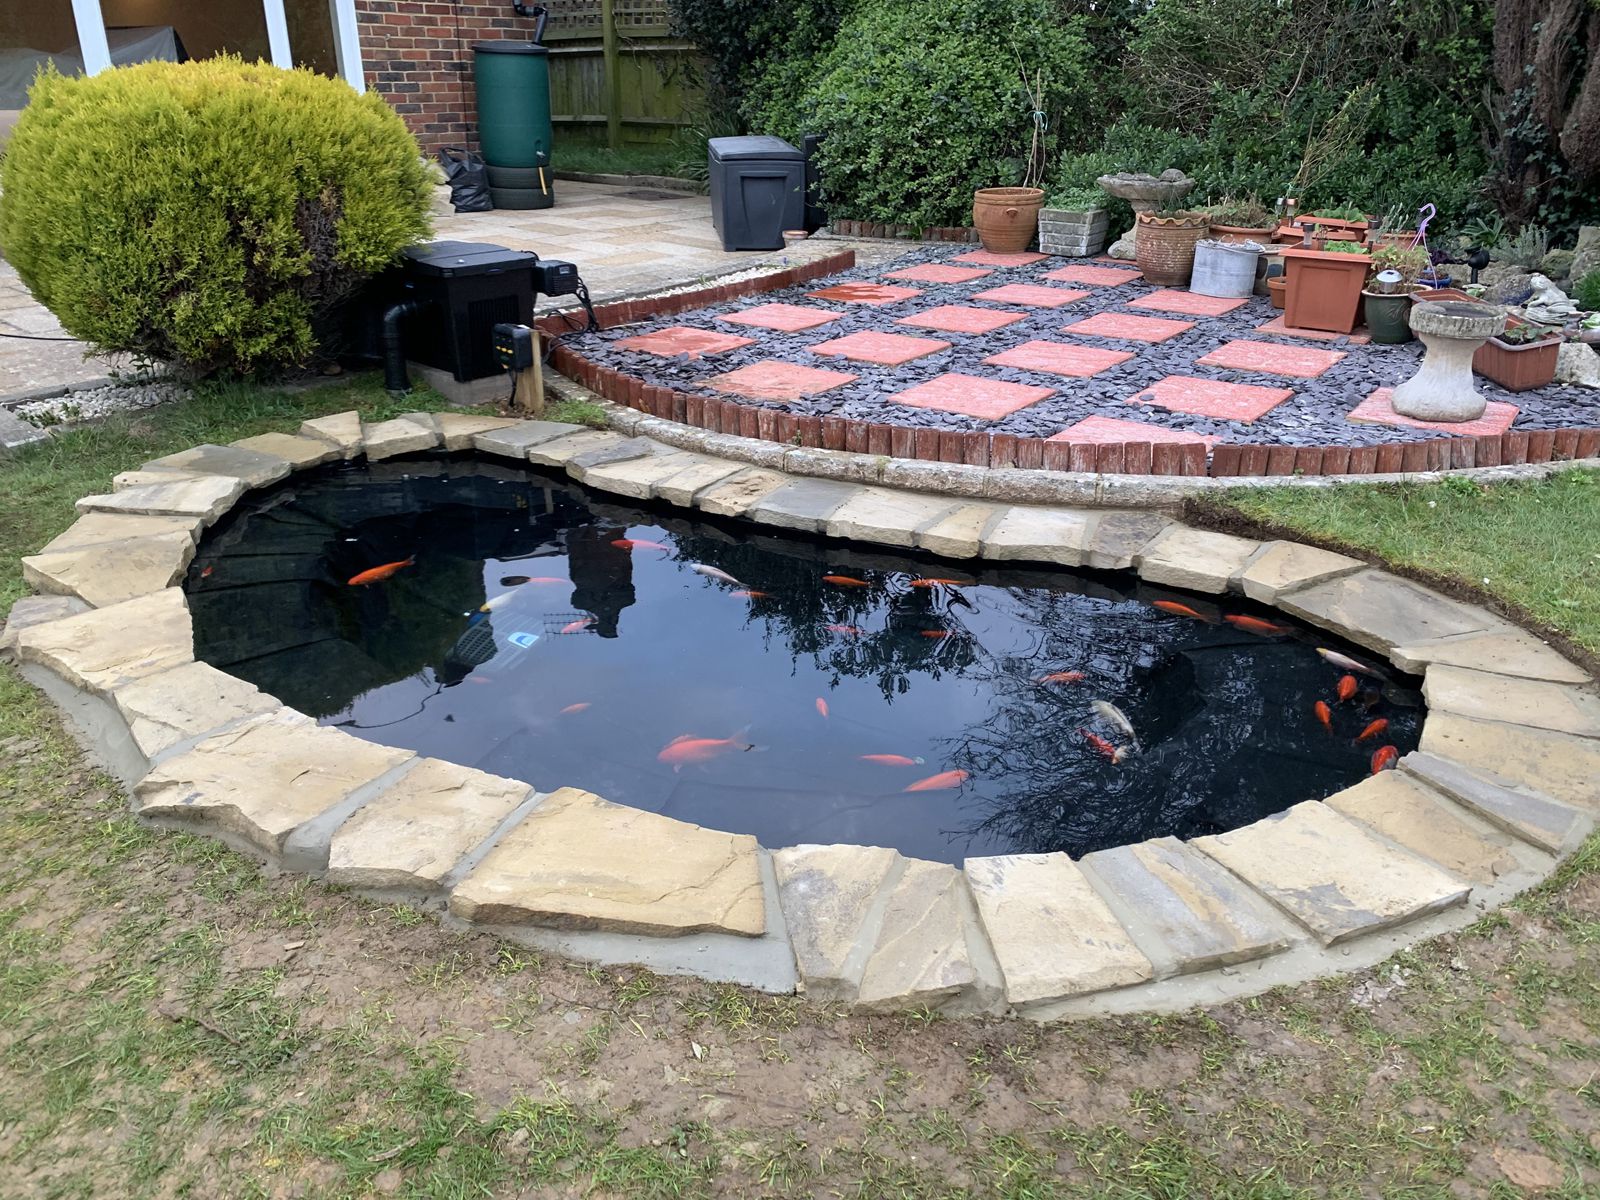 Crystal clear pond cleaning service in thge Surrey area